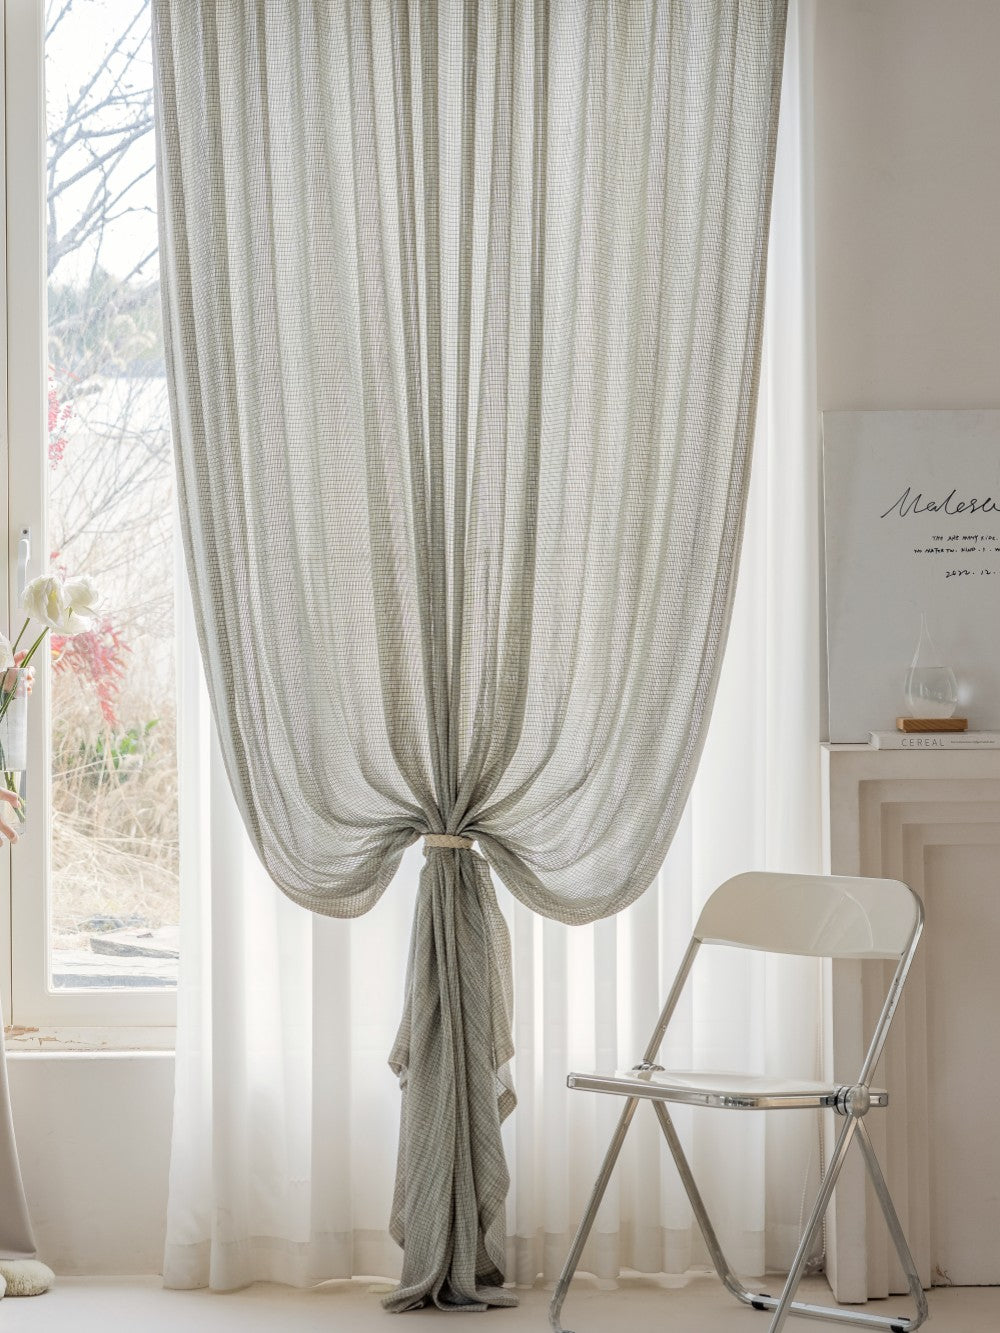 Elegant smoky green sheer curtain imported from Germany, displayed in a sunlit room with minimalist decor, enhancing a serene and sophisticated ambiance perfect for living rooms or studies.